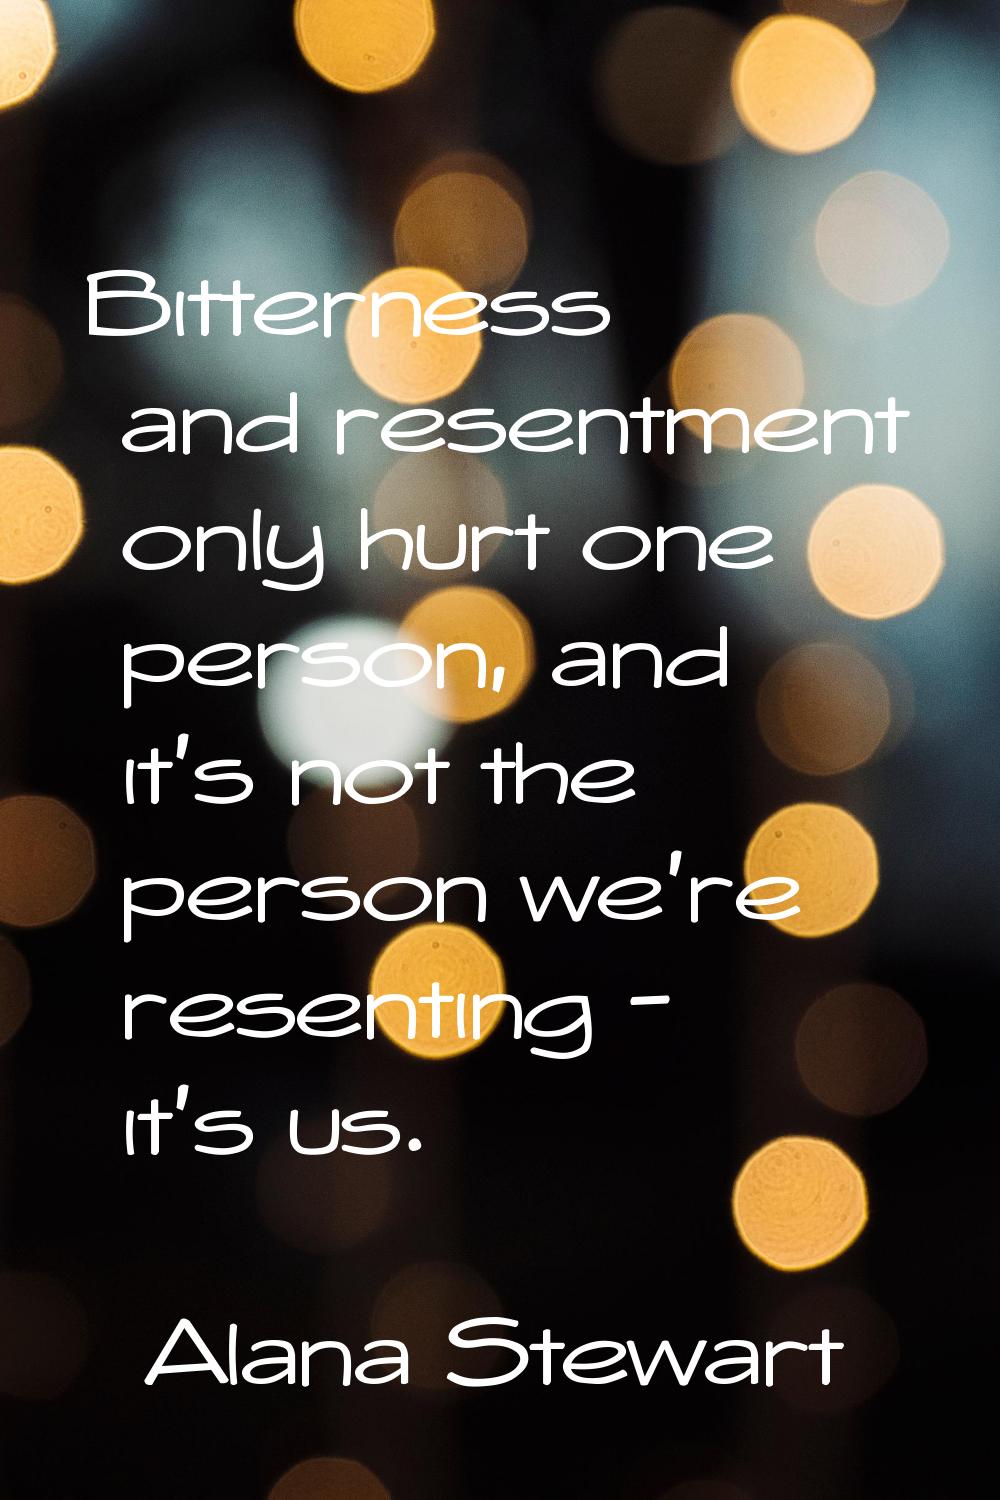 Bitterness and resentment only hurt one person, and it's not the person we're resenting - it's us.